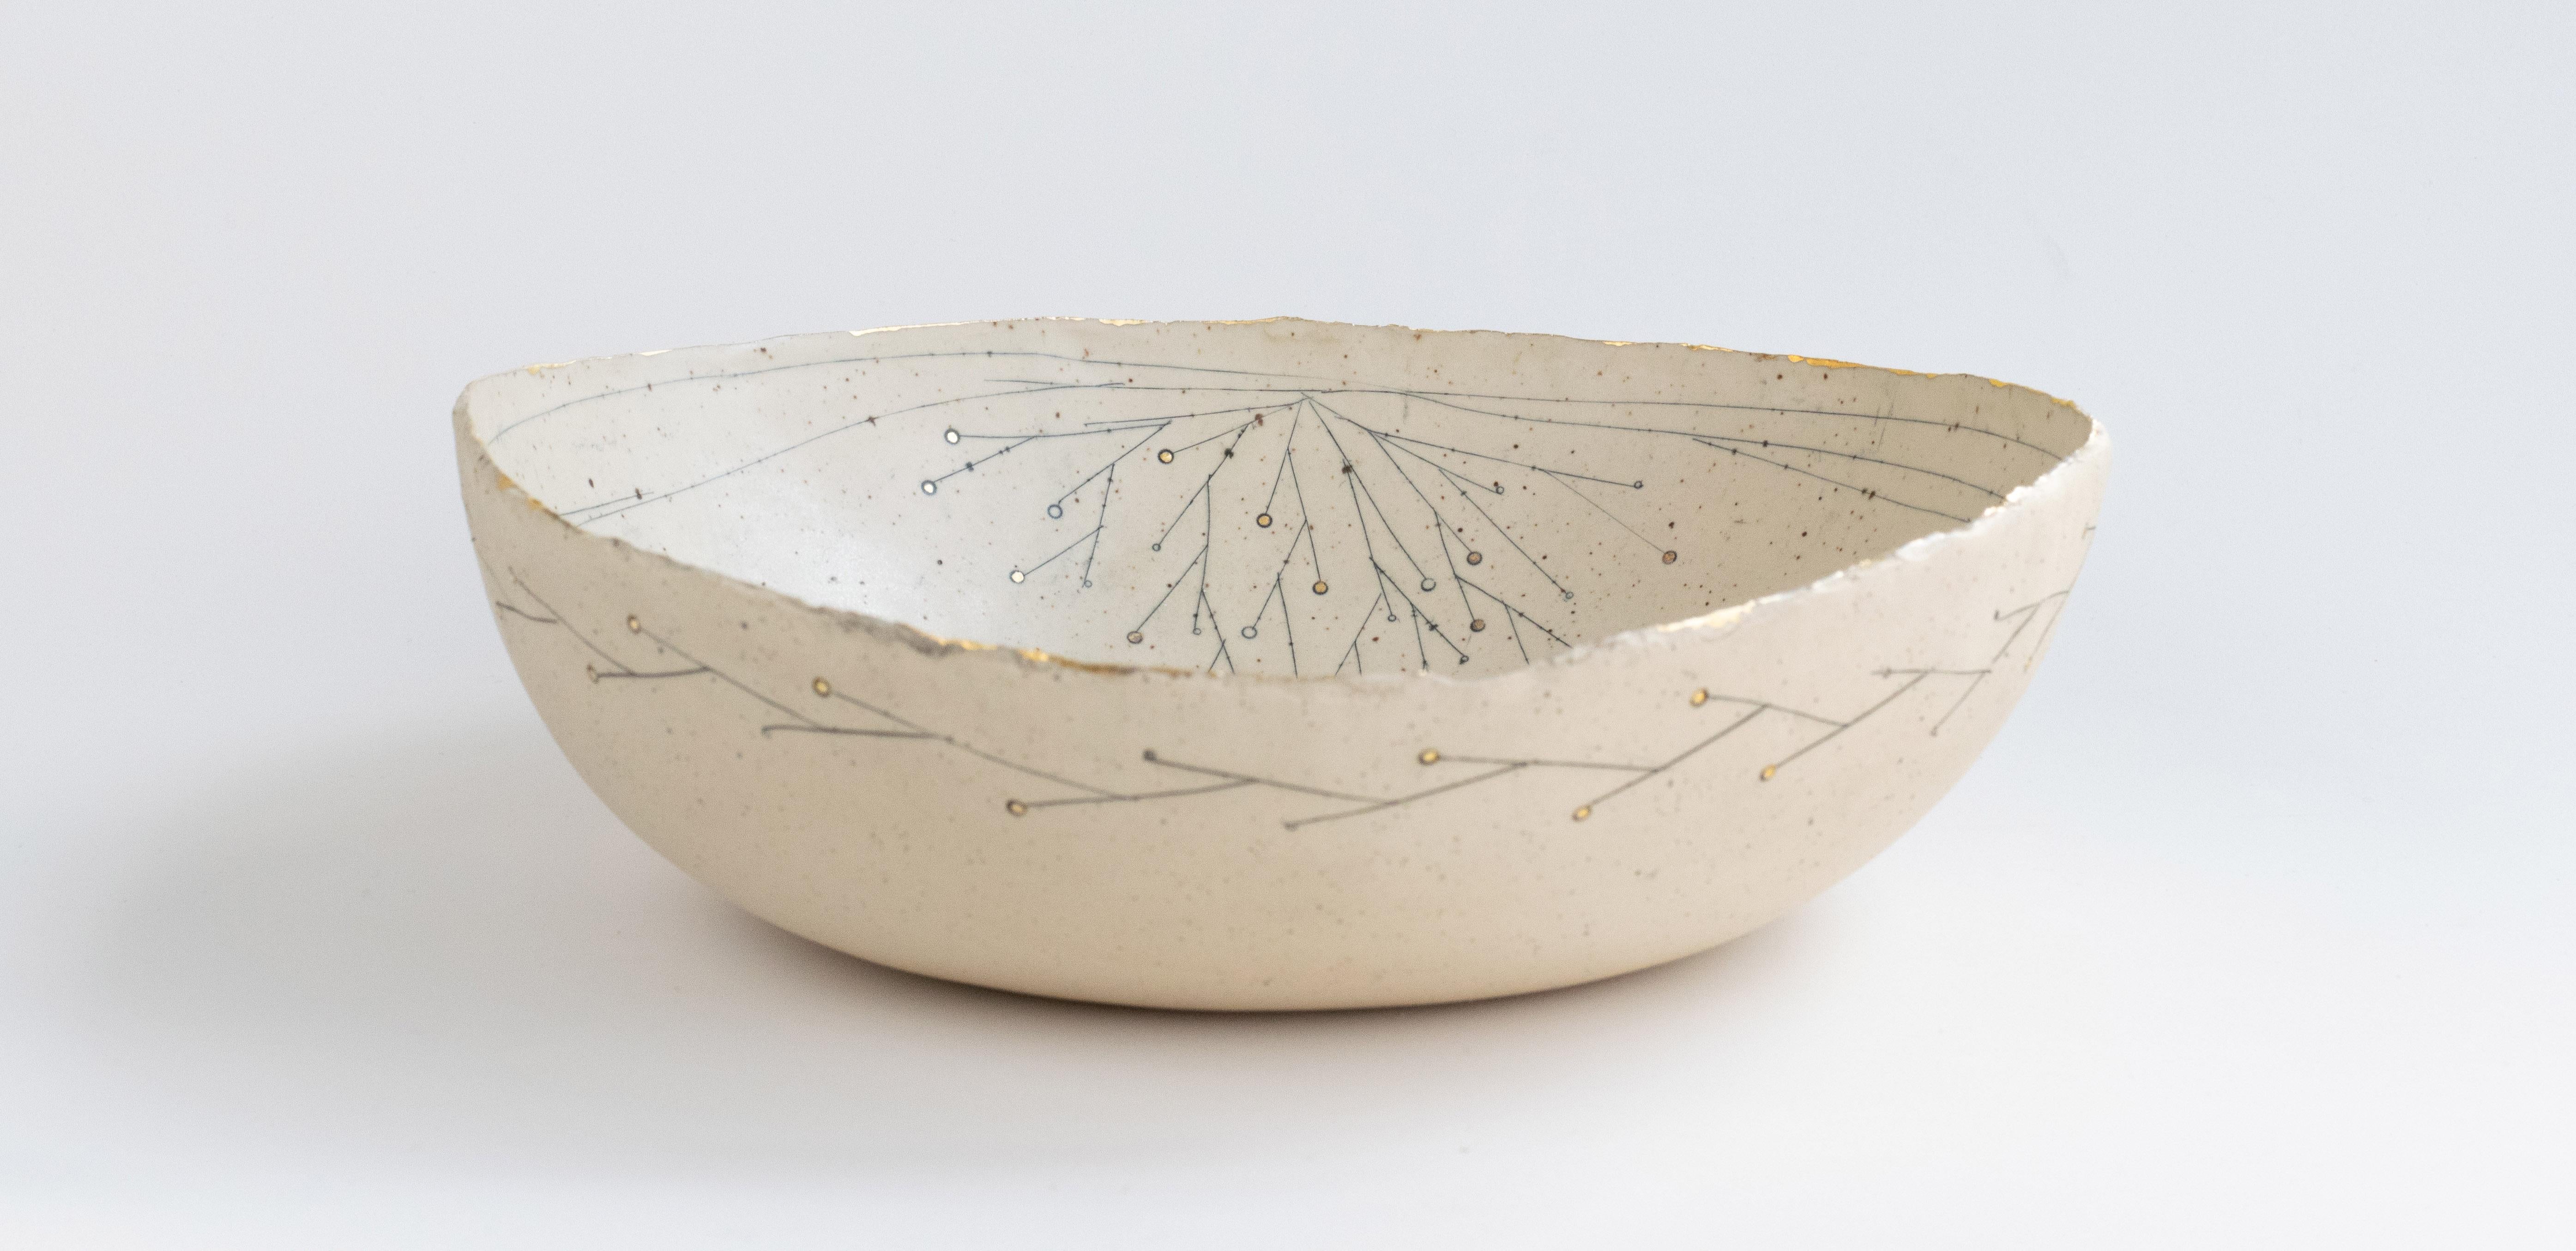 A delicate hand-crafted bowl, organic in shape with a torn clay edge in natural speckled stoneware clay.
Part of the Golden Promise Series- a theme of abstracted and stylized elements from nature. This bowl has elements of germination and new